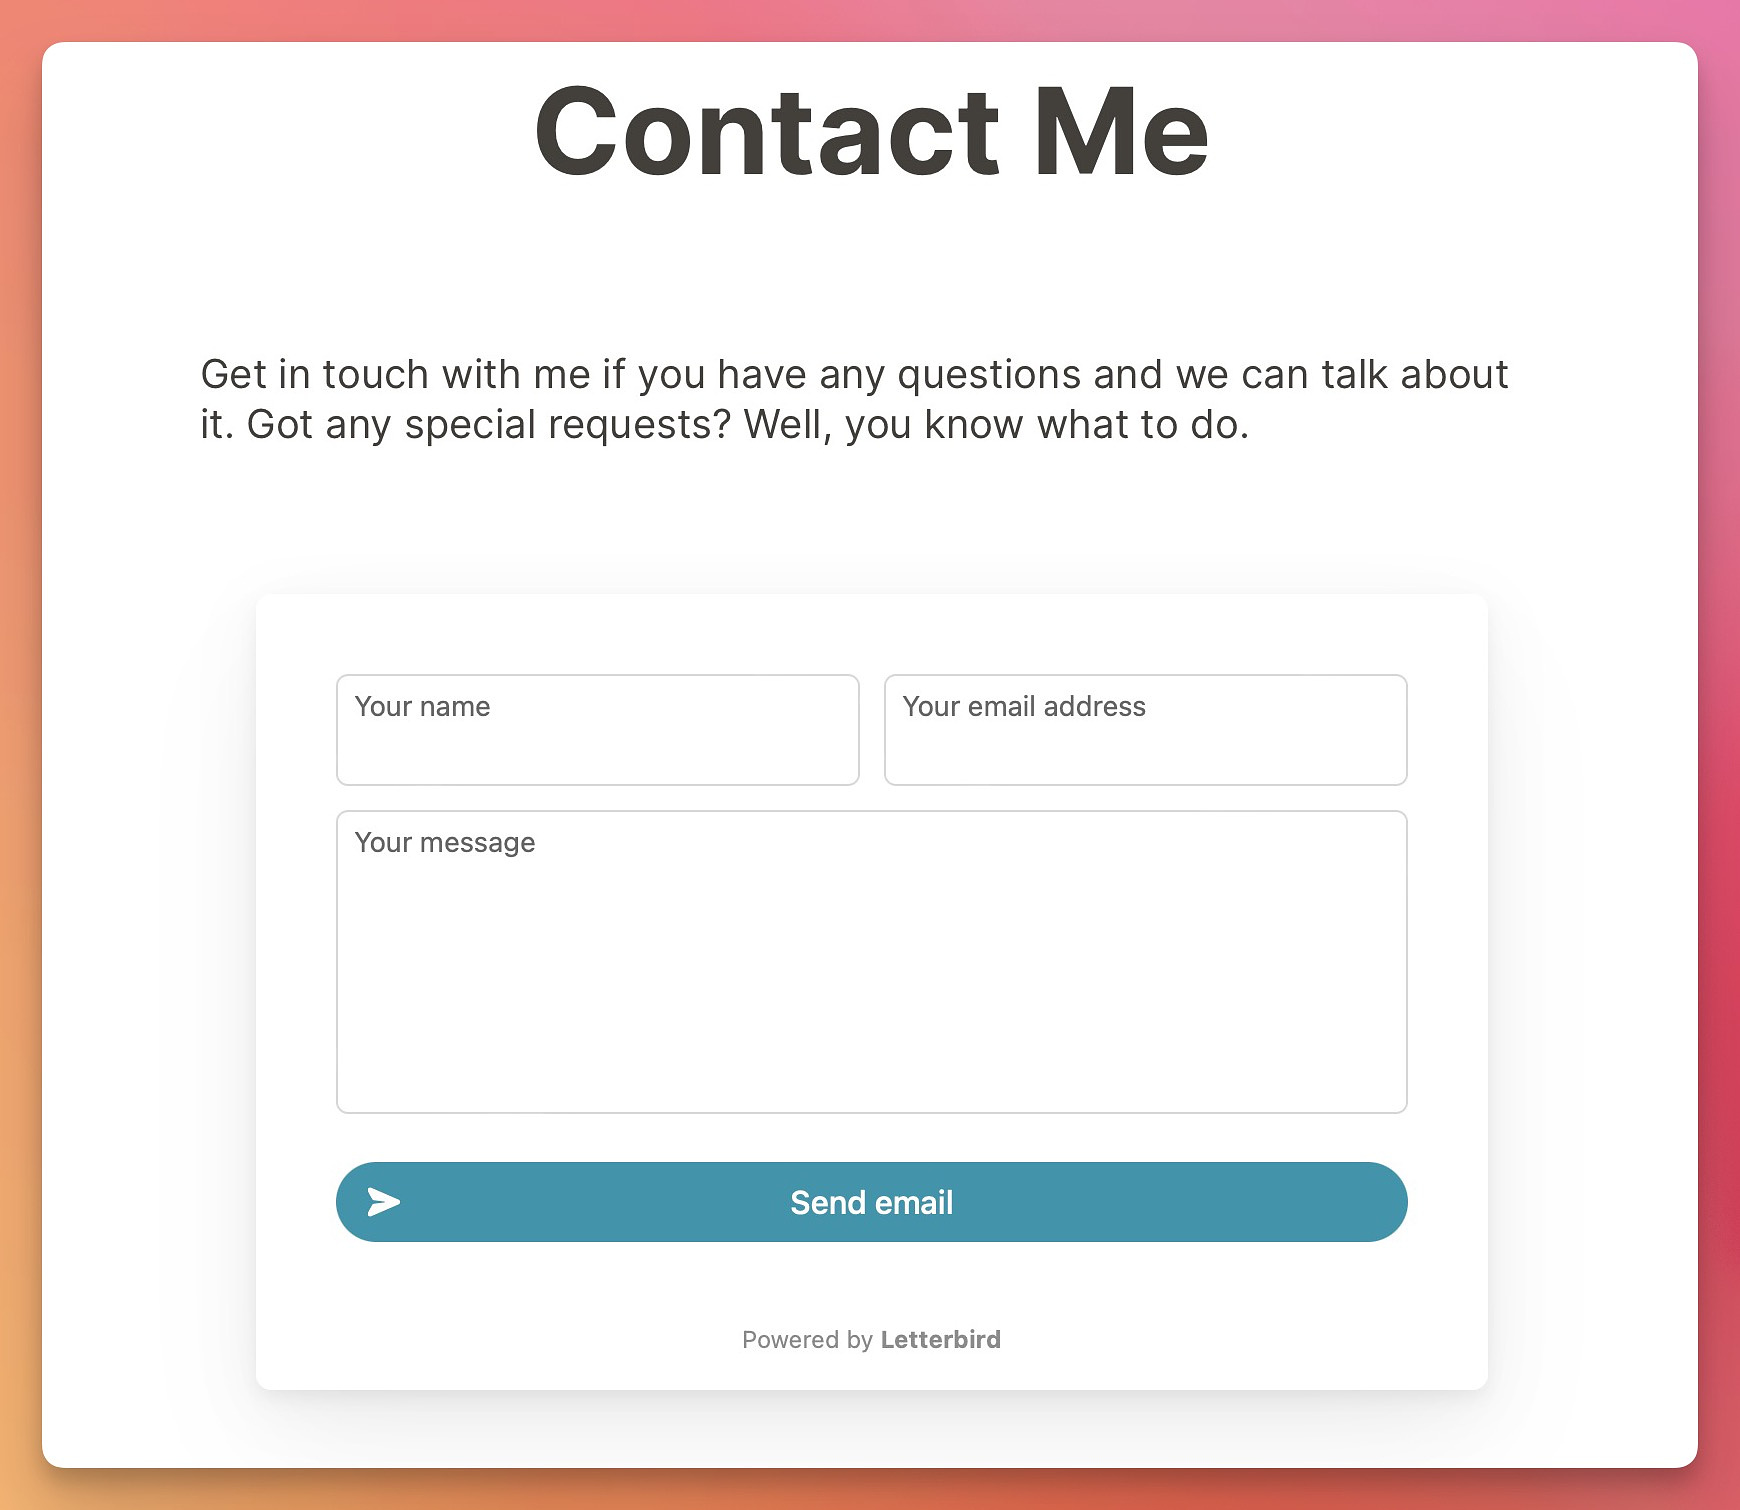 Contact form showing at the bottom of the page.